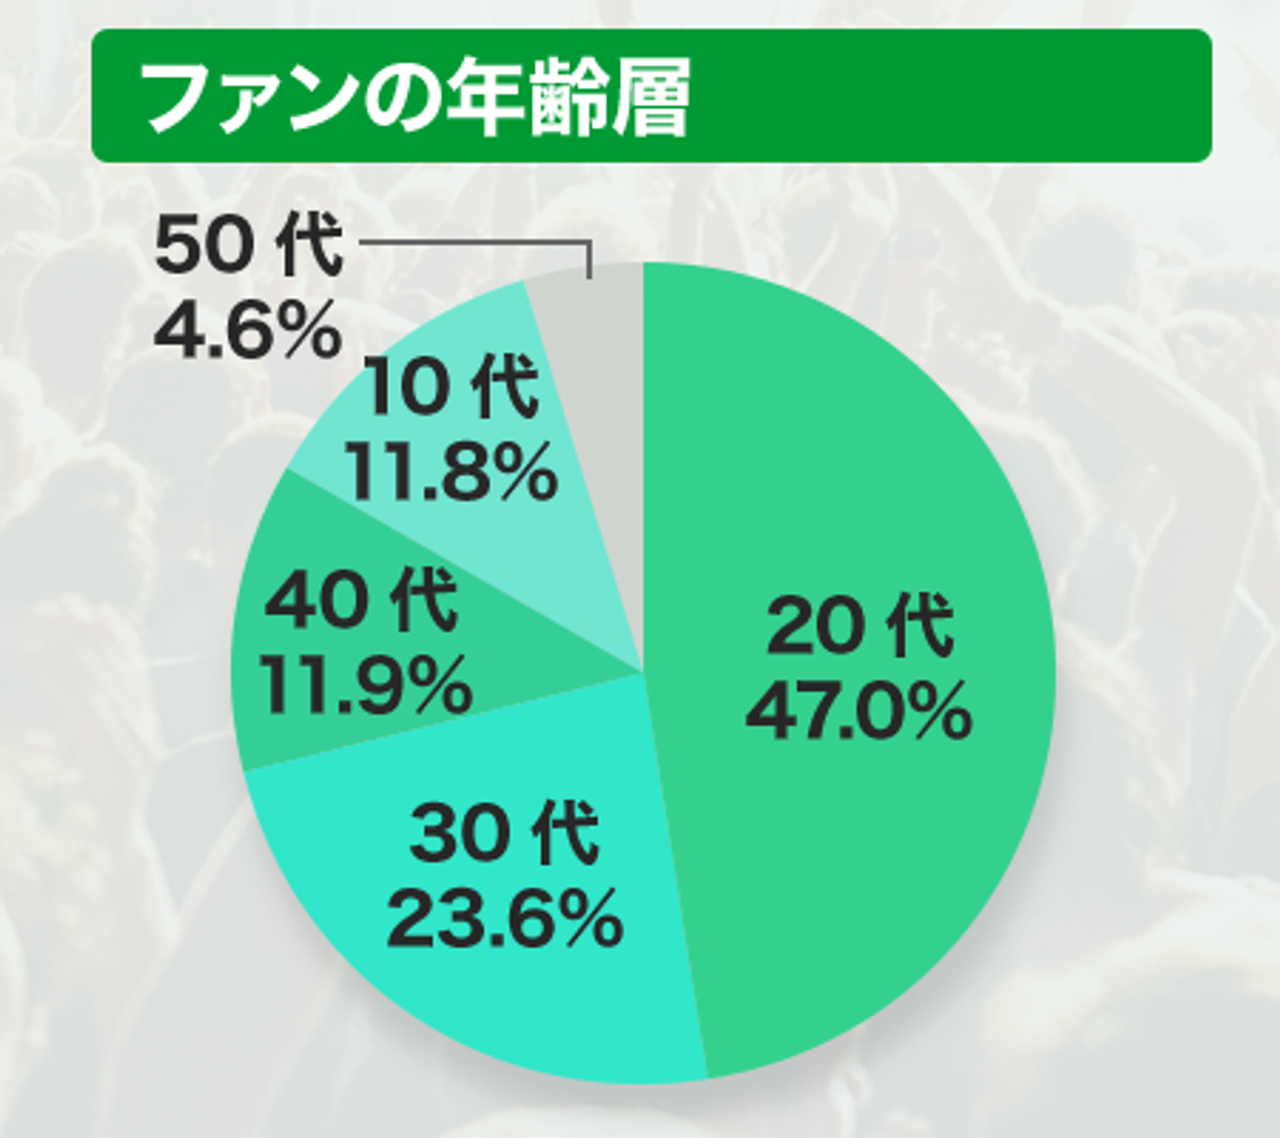 Most of the fans who use EC sites are young people in their 20s, at 47%.